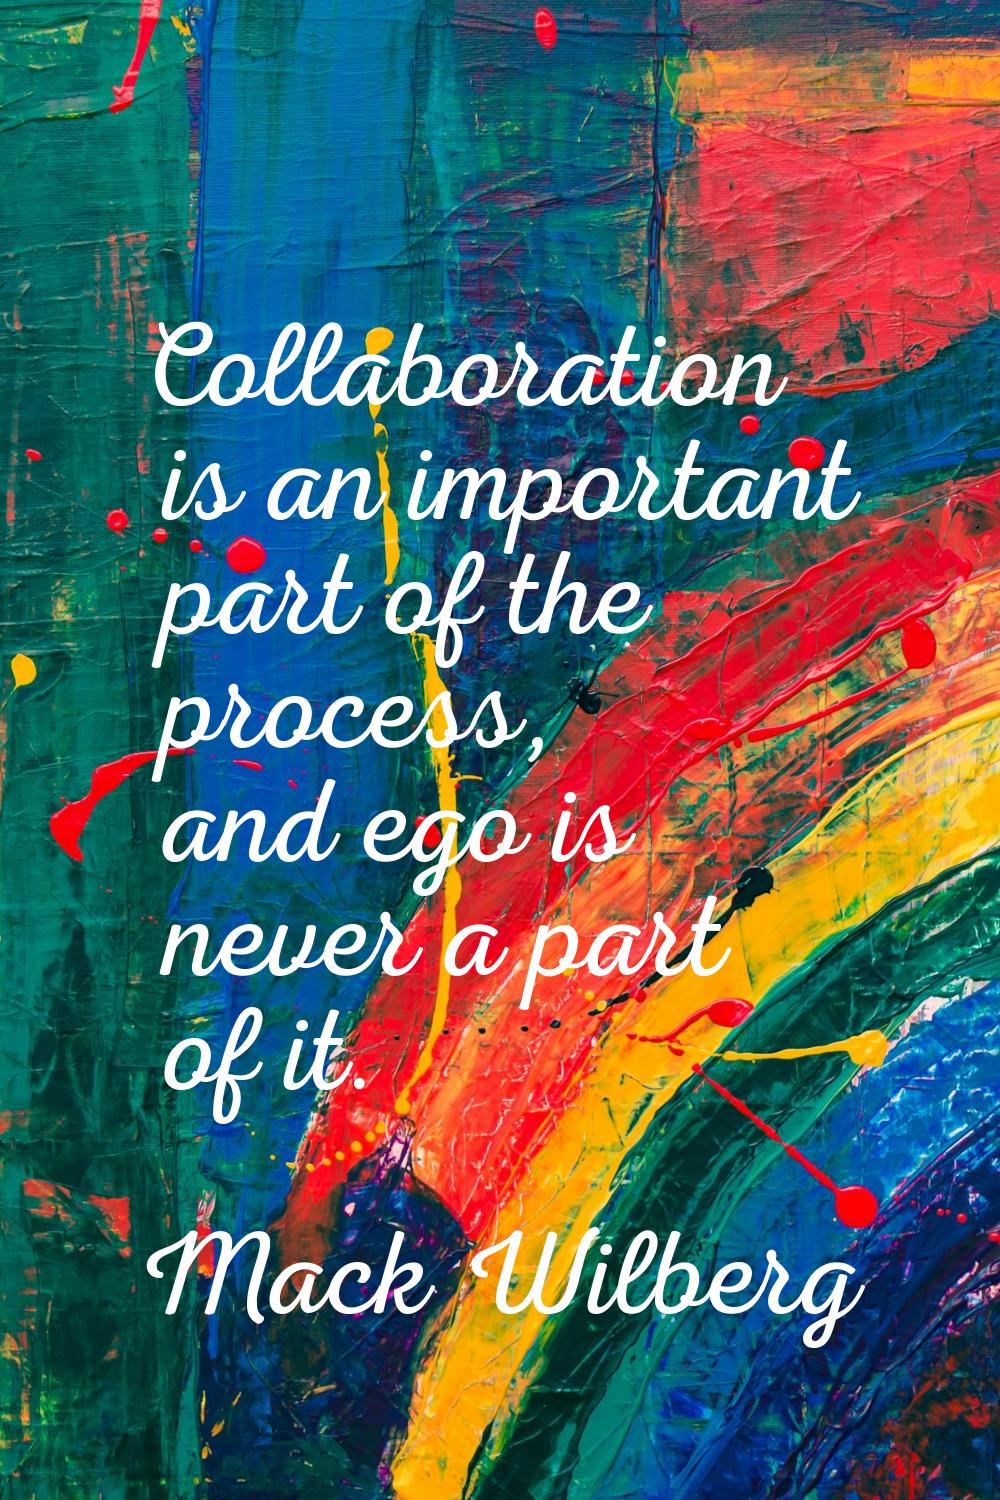 Collaboration is an important part of the process, and ego is never a part of it.